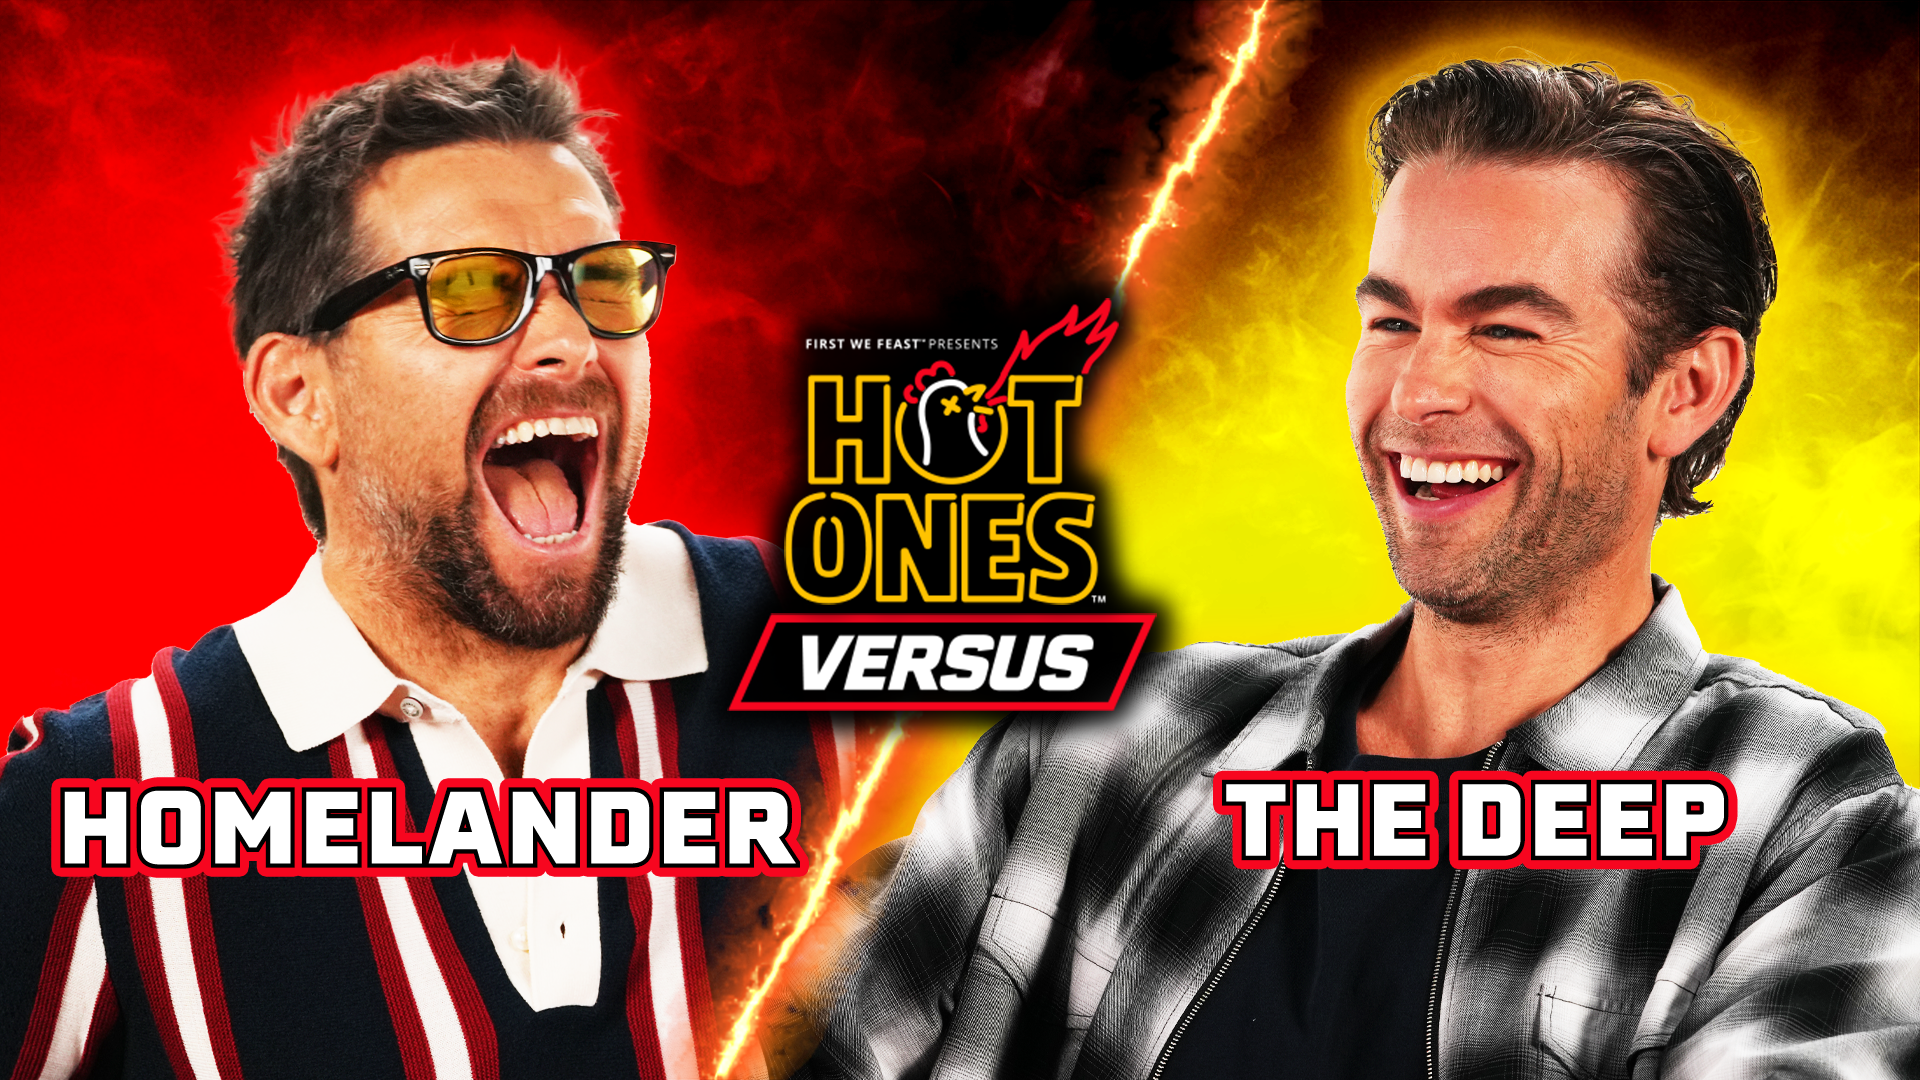 The Boys’ Antony Starr vs. Chace Crawford | Hot Ones Versus